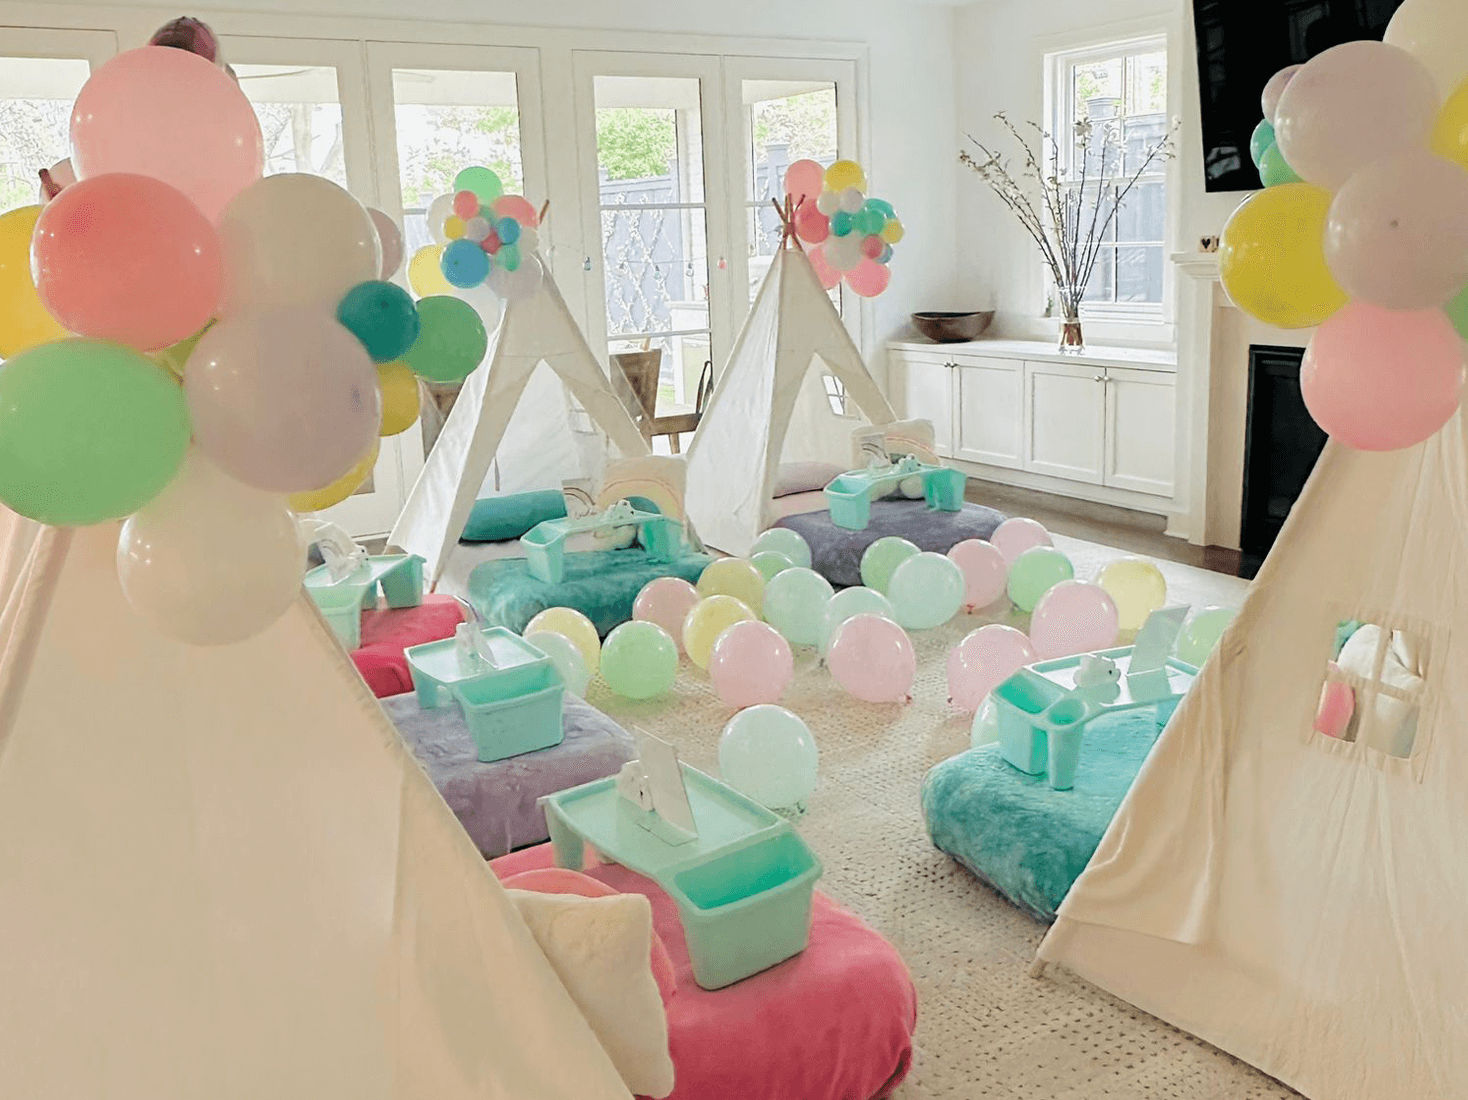 Slumber party and teepee party and balloons